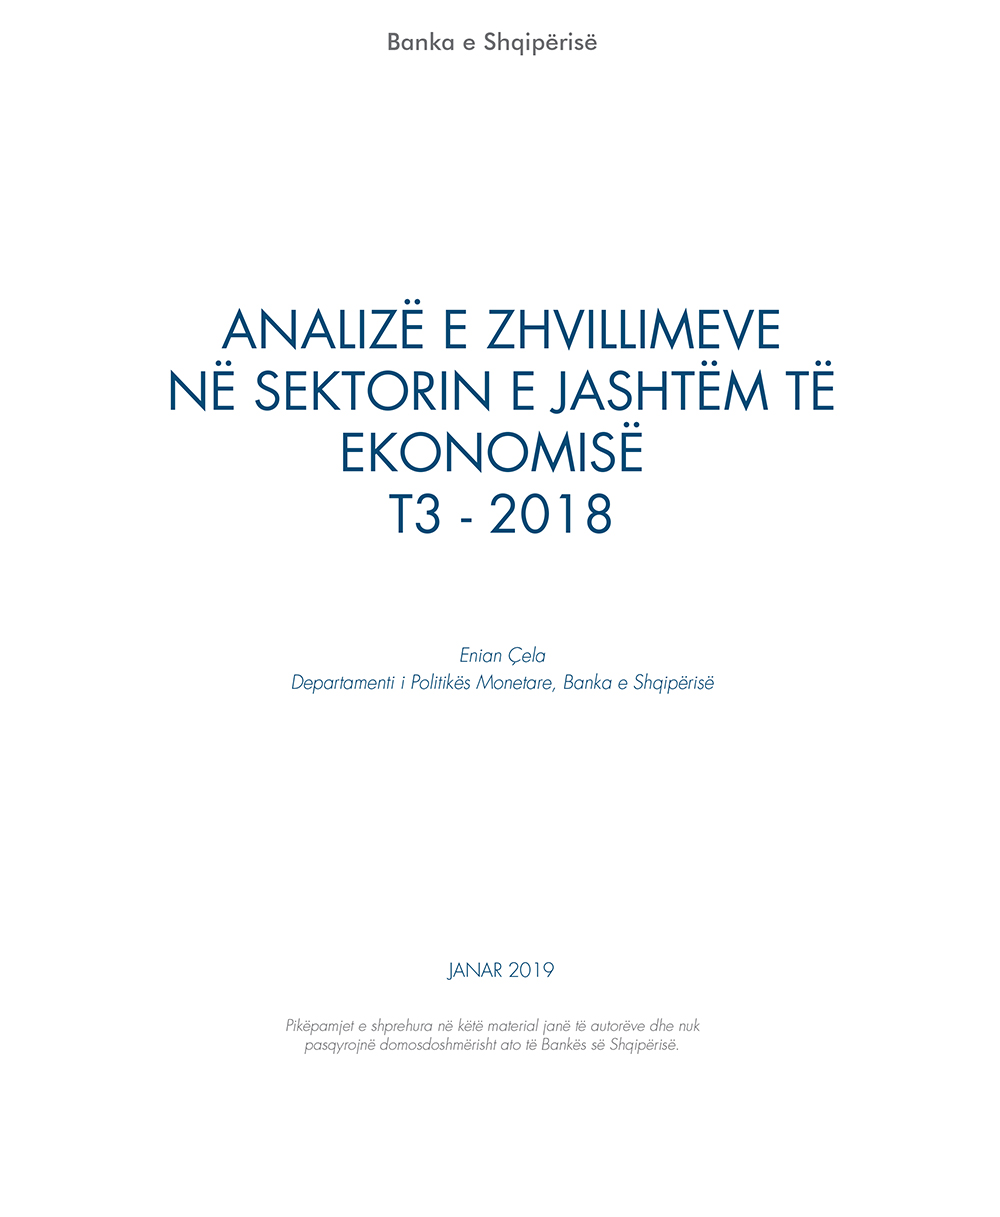 Analysis of developments in the external sector of the economy 2018 Q3